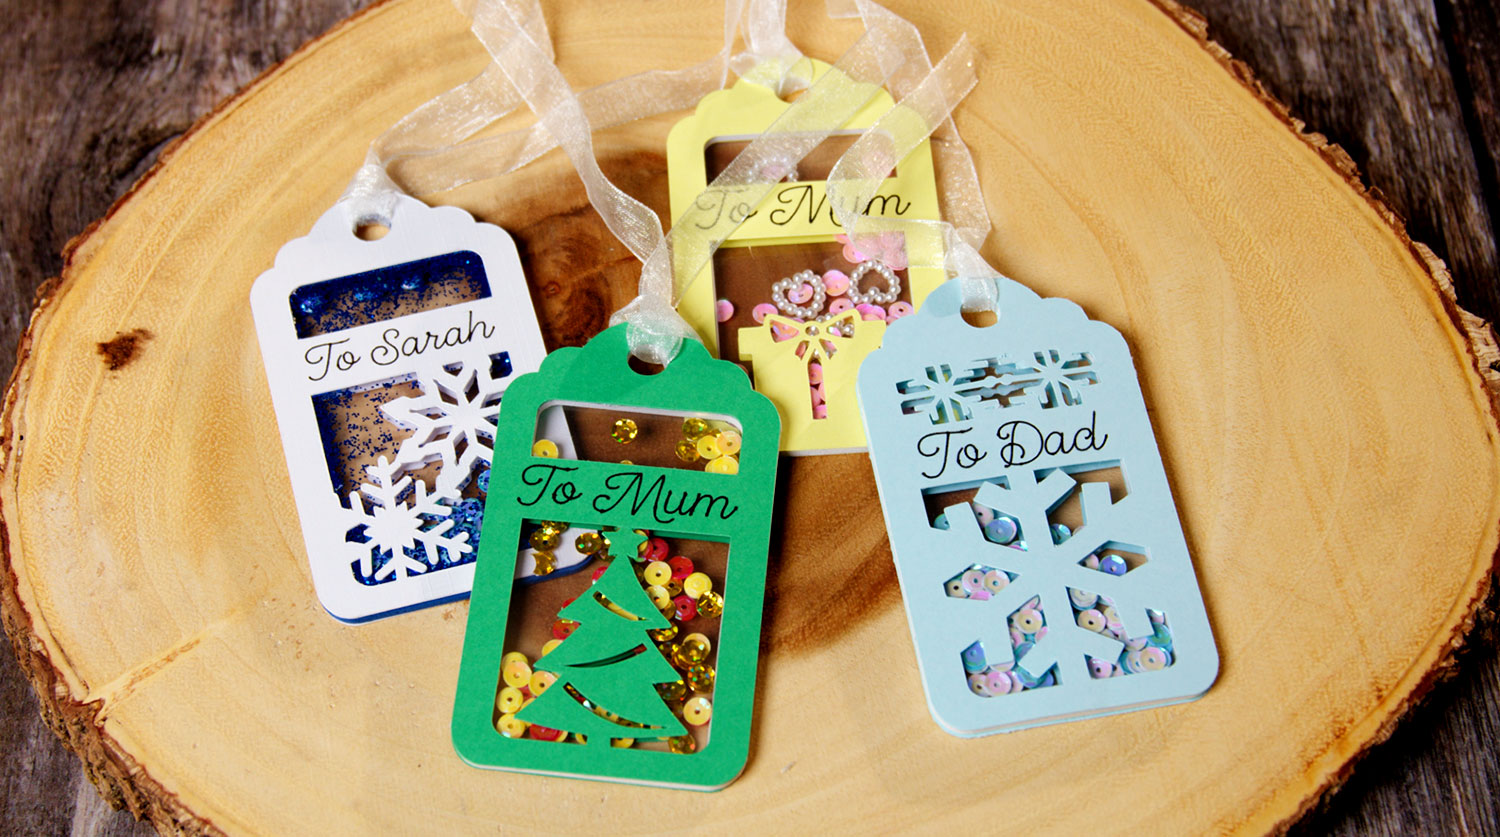 DIY Gift Tags: Design Your Own SHAKER Gift Tags!